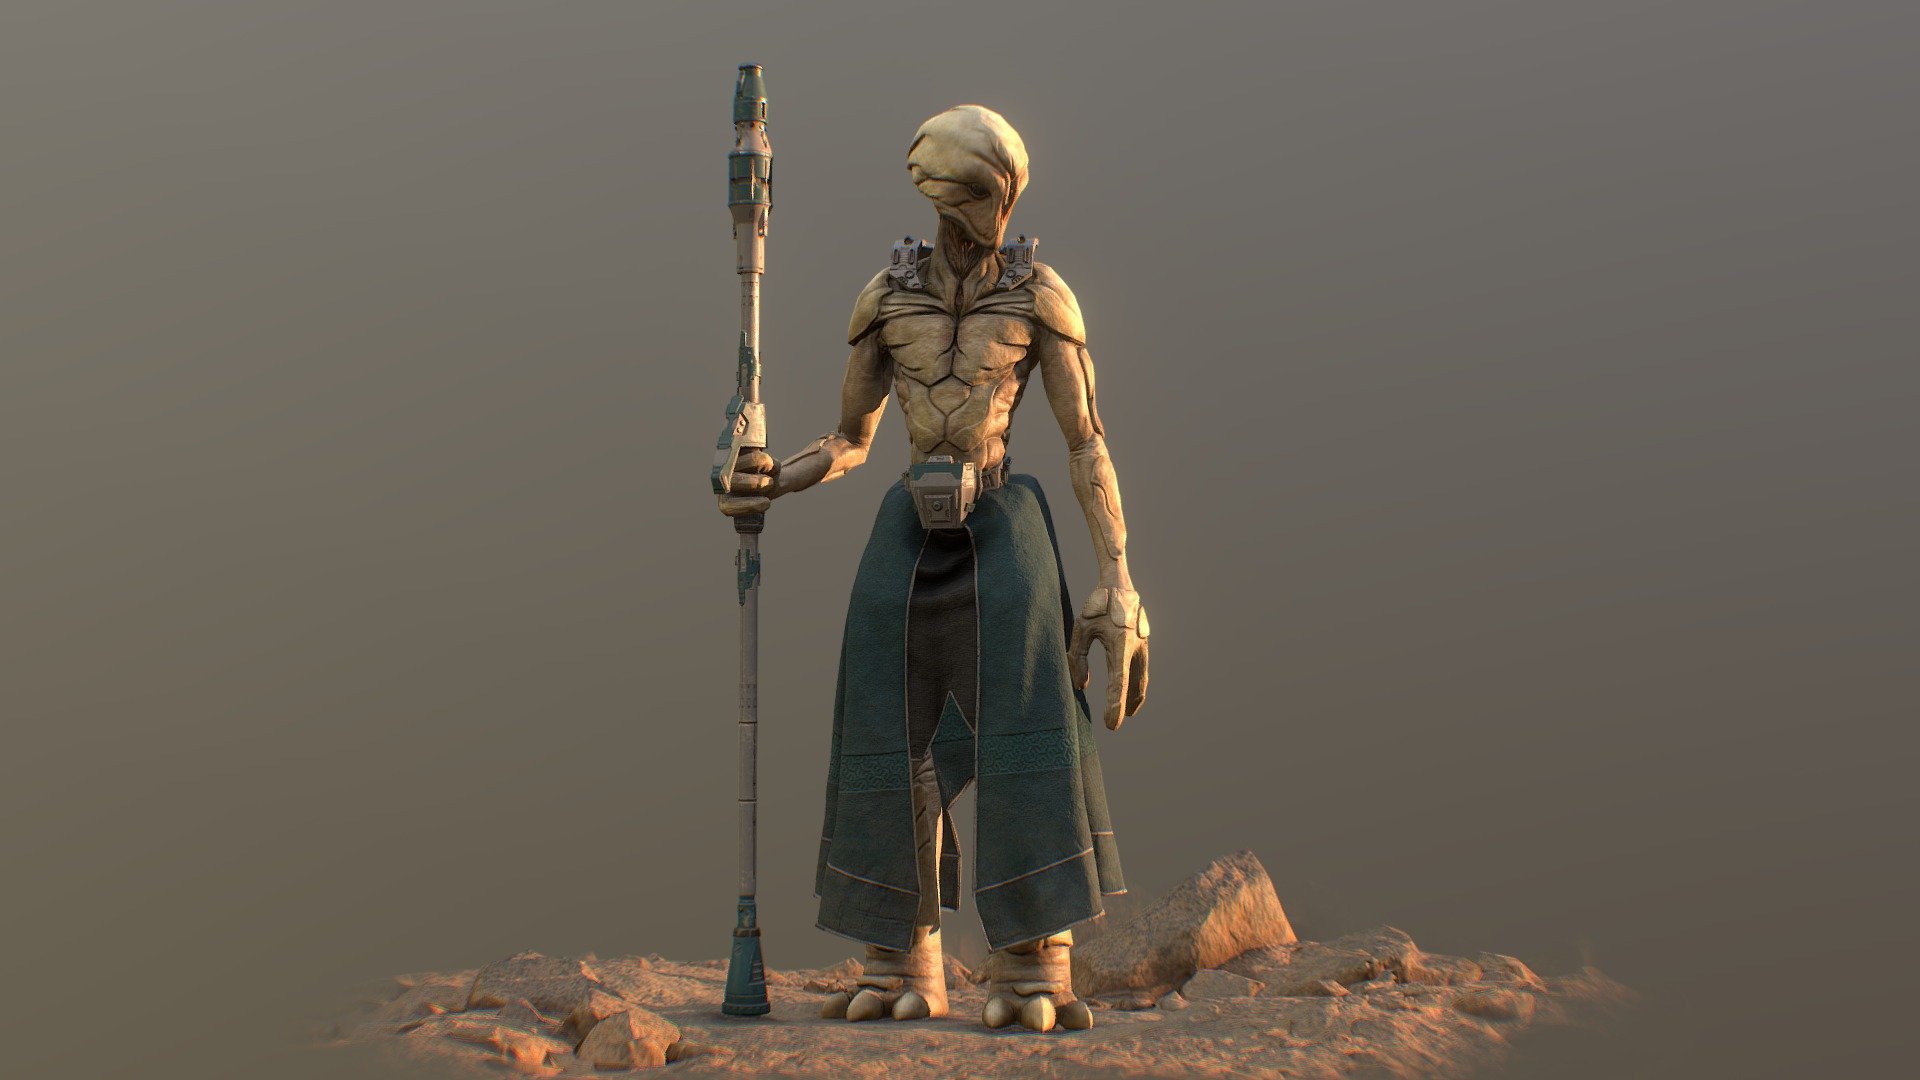 Personal project. Probably the fist character ever that I designed, modeled, textured, rigged, and (slightly) animated :) 

Made with 3ds max, zbrush, substance painter, photoshop.

Thanks to Miloš Černý and his Youtube channel for the awesome tutorials for CAT rigging in 3ds max, check it out if you're interested 3d model